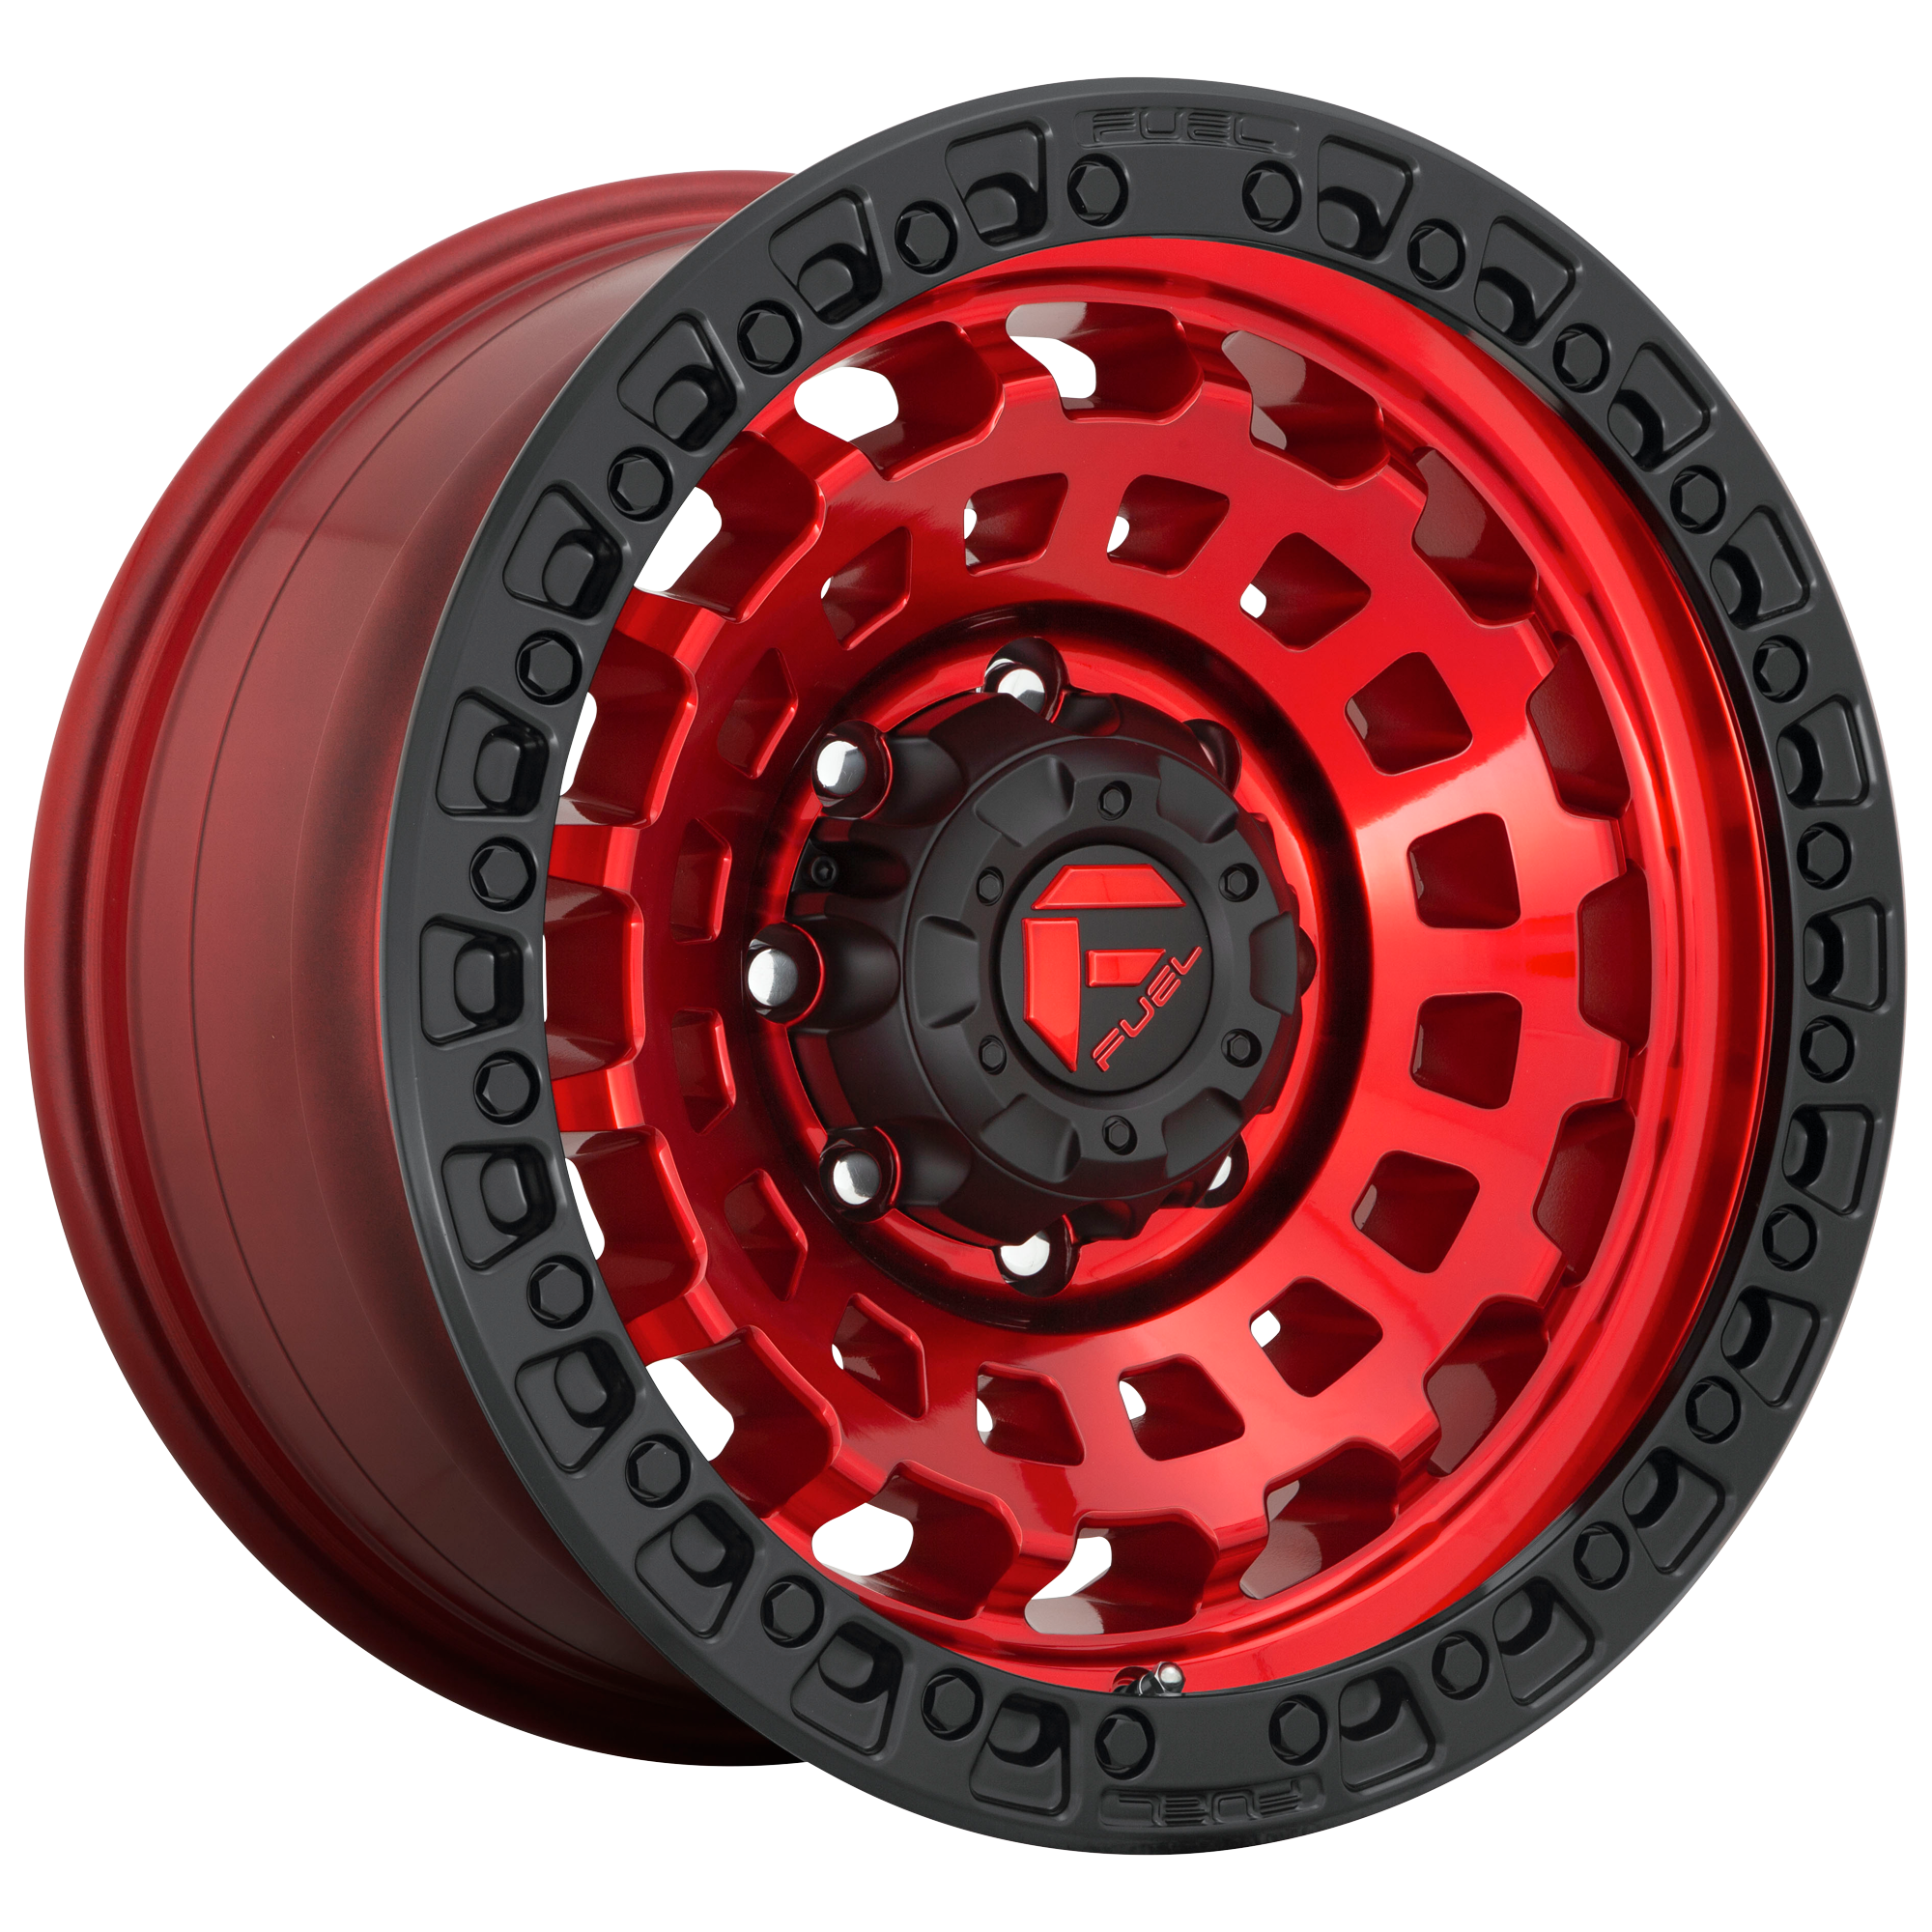 ZEPHYR 17x9 5x150.00 CANDY RED BLACK BEAD RING (1 mm) - Tires and Engine Performance